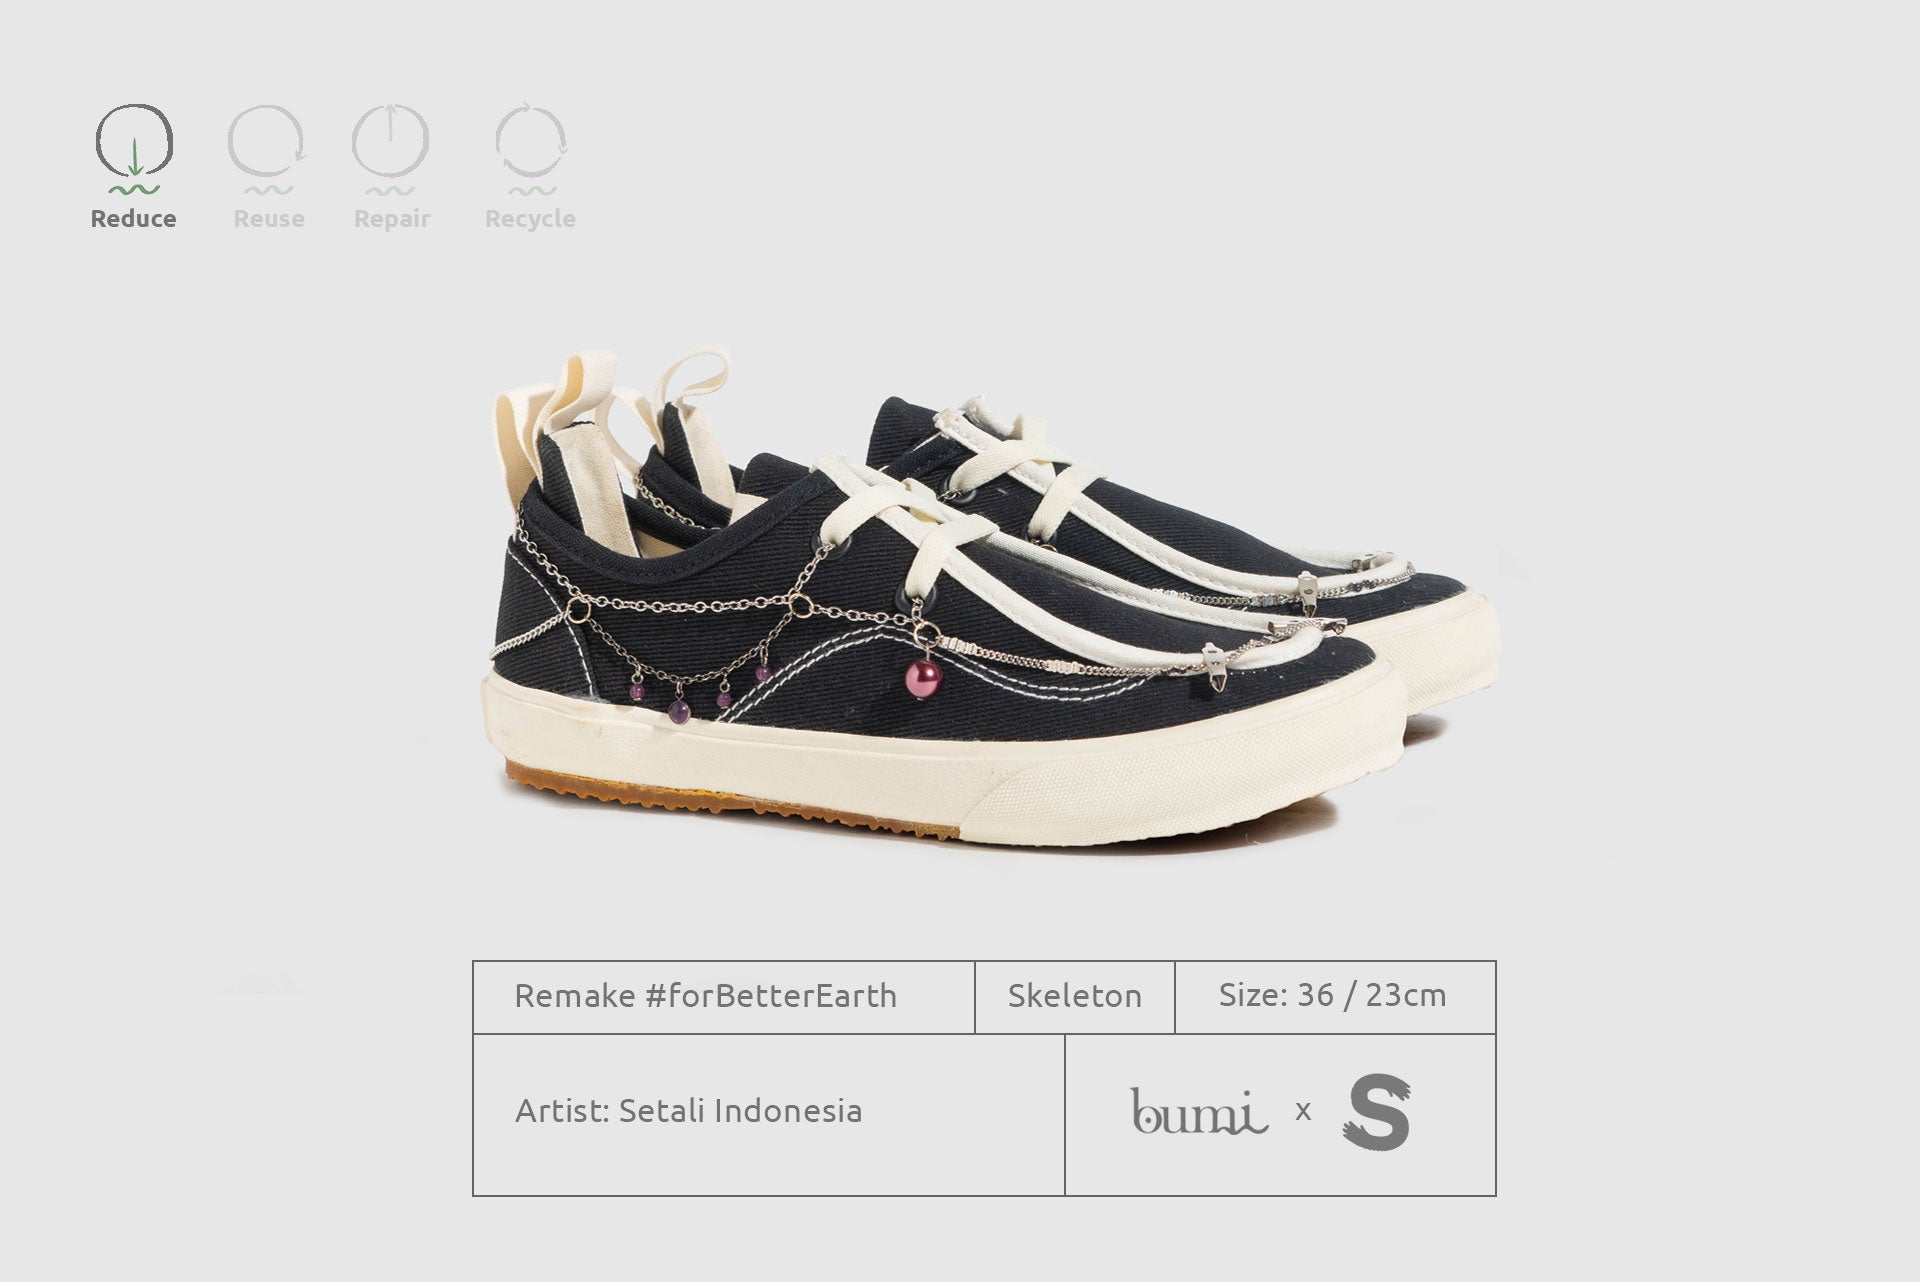 Kotta Hybrid Sneakers - Remade By Setali Indonesia